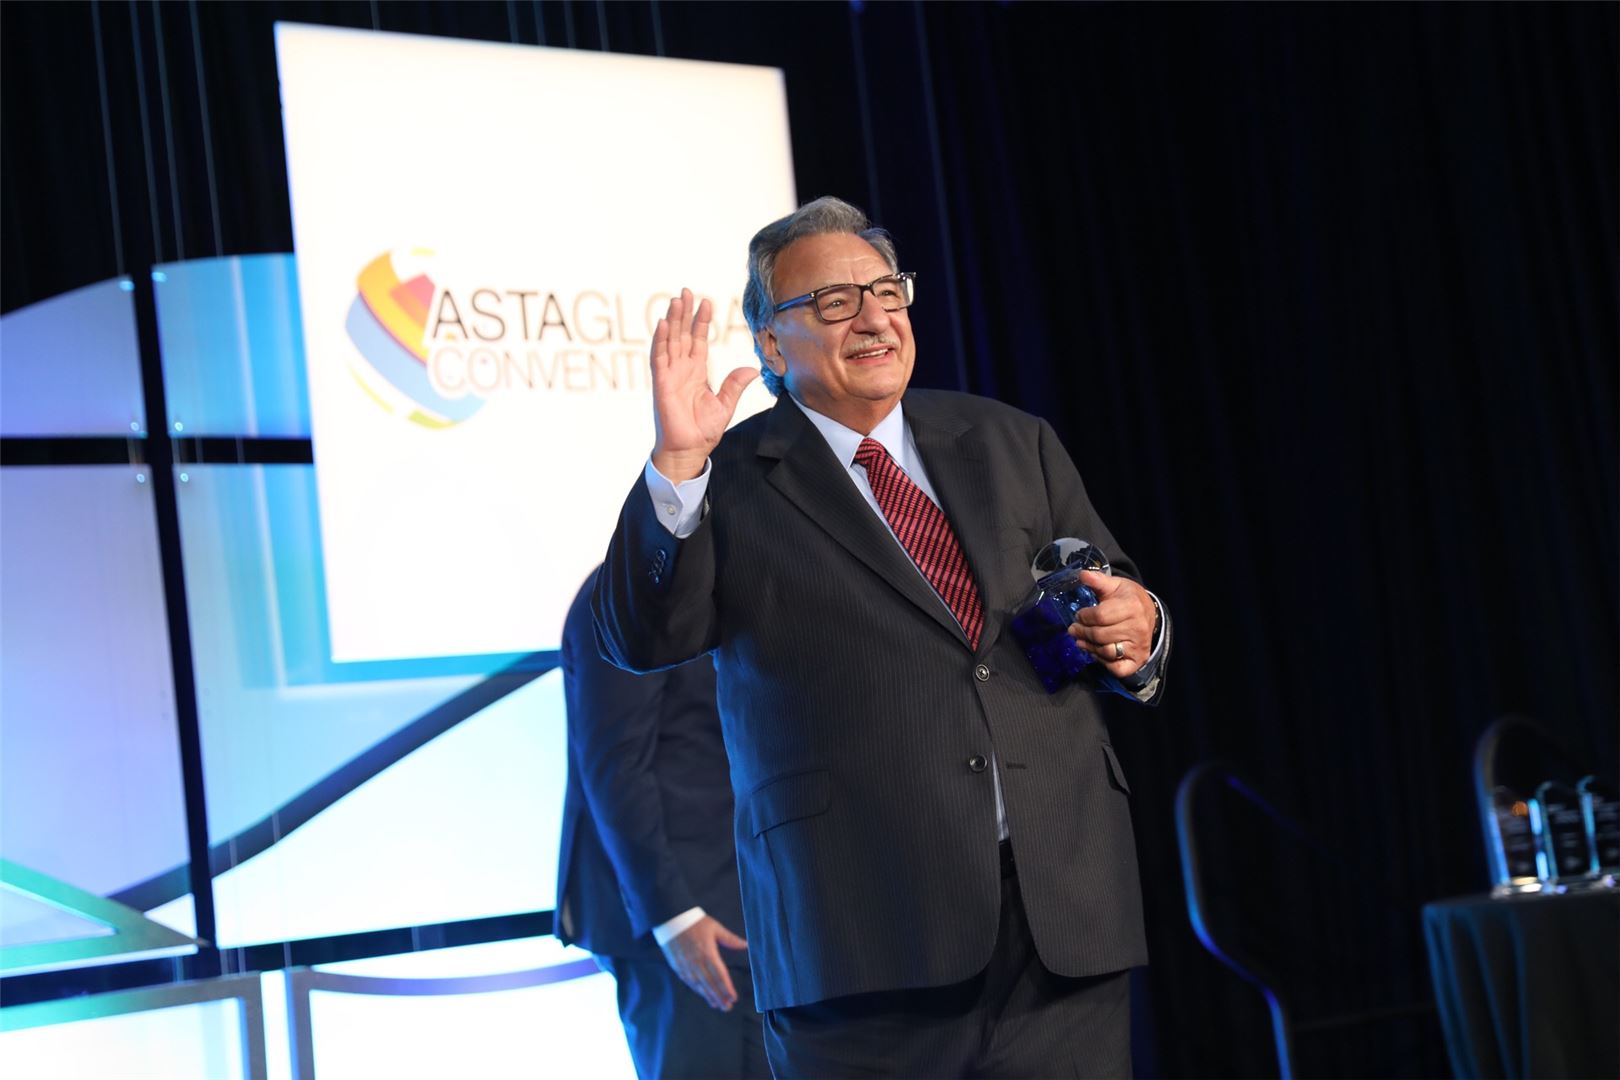 AMG's Rick Mazza Presented with Lifetime Achievement Award From ASTA